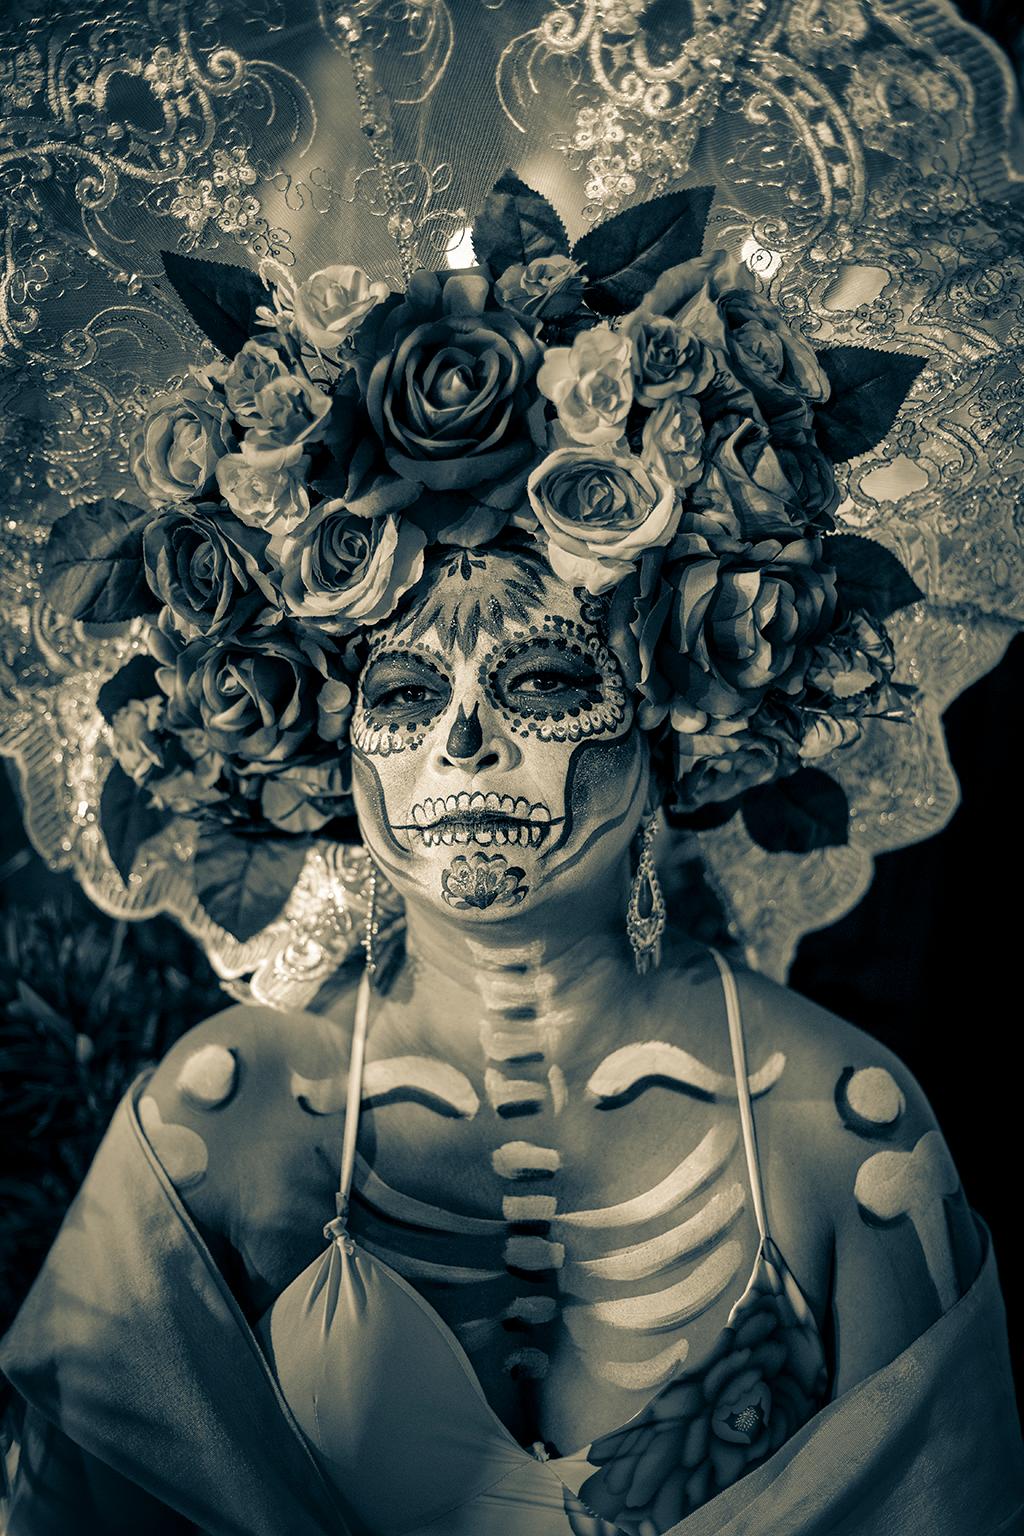  Cosmo Condina Portrait Photograph - “A crown of roses for death”, Day of the Dead, B&W, Mexico 2023